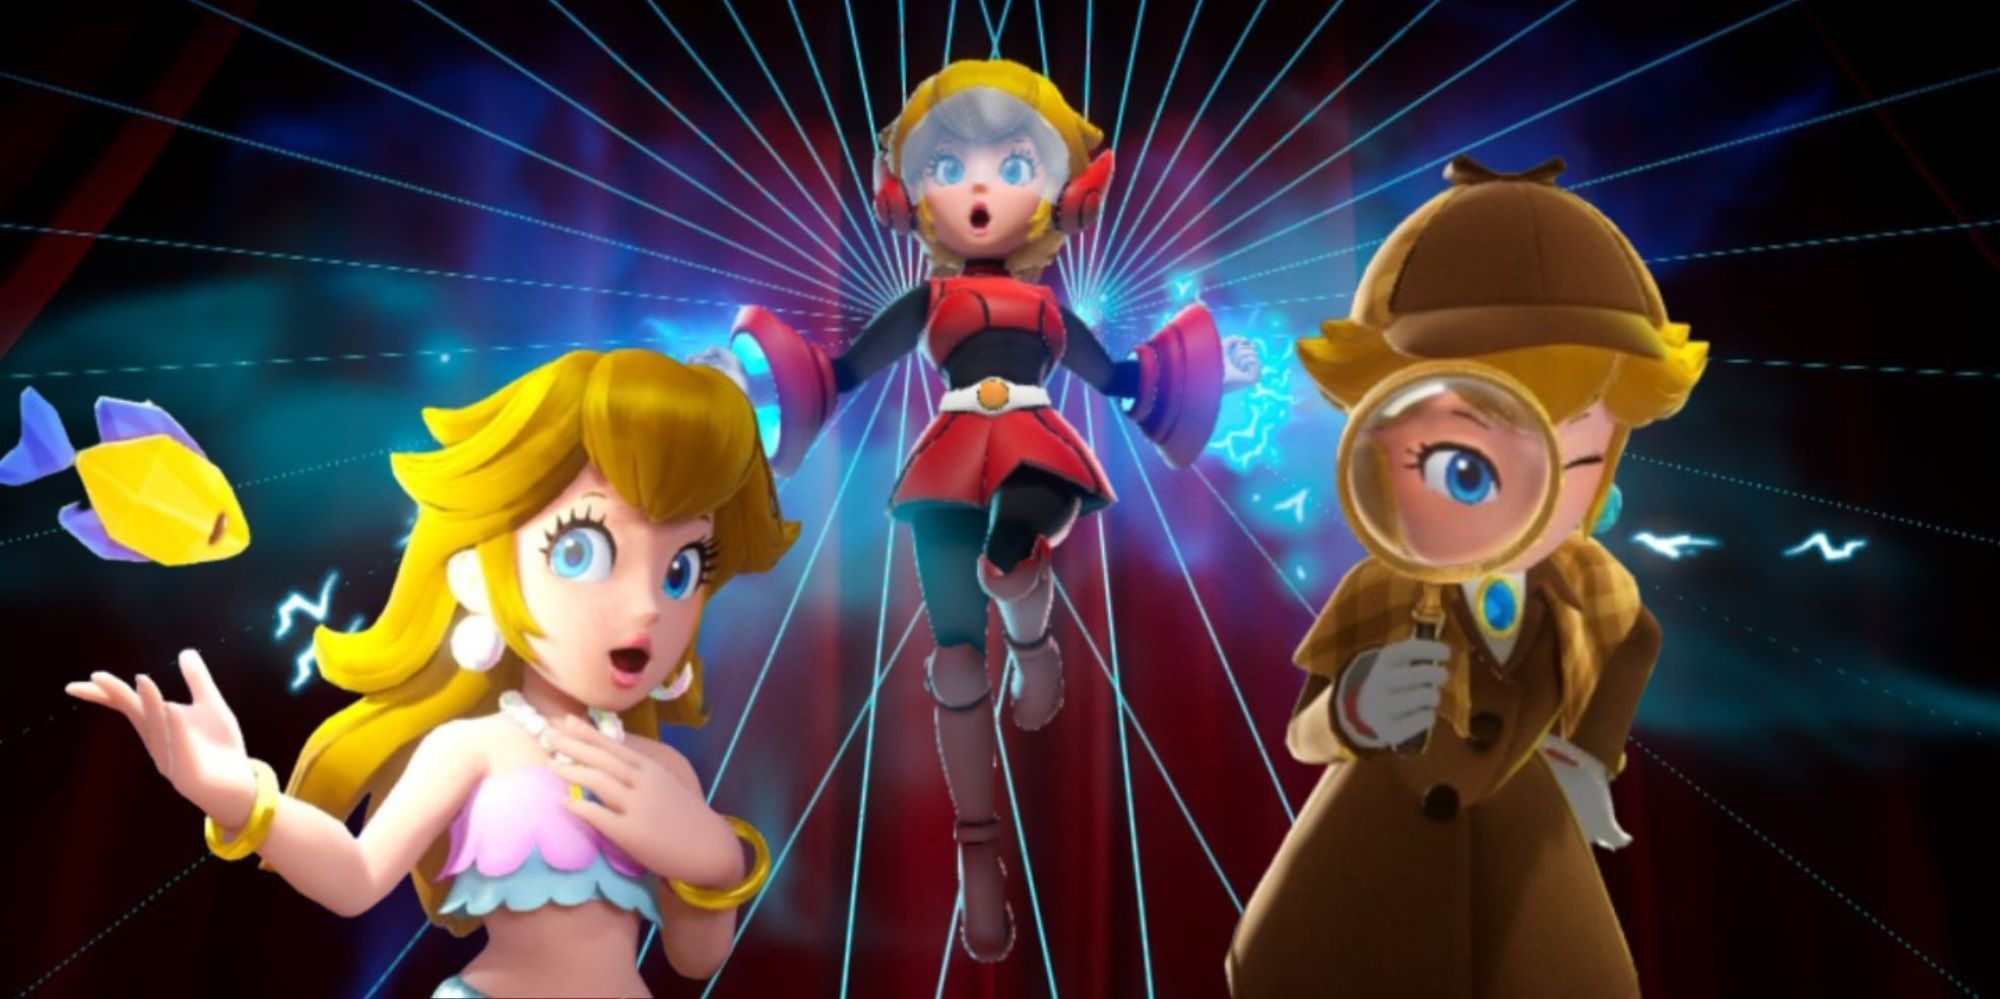 Mighty, Mermaid, and Detective Peach all together